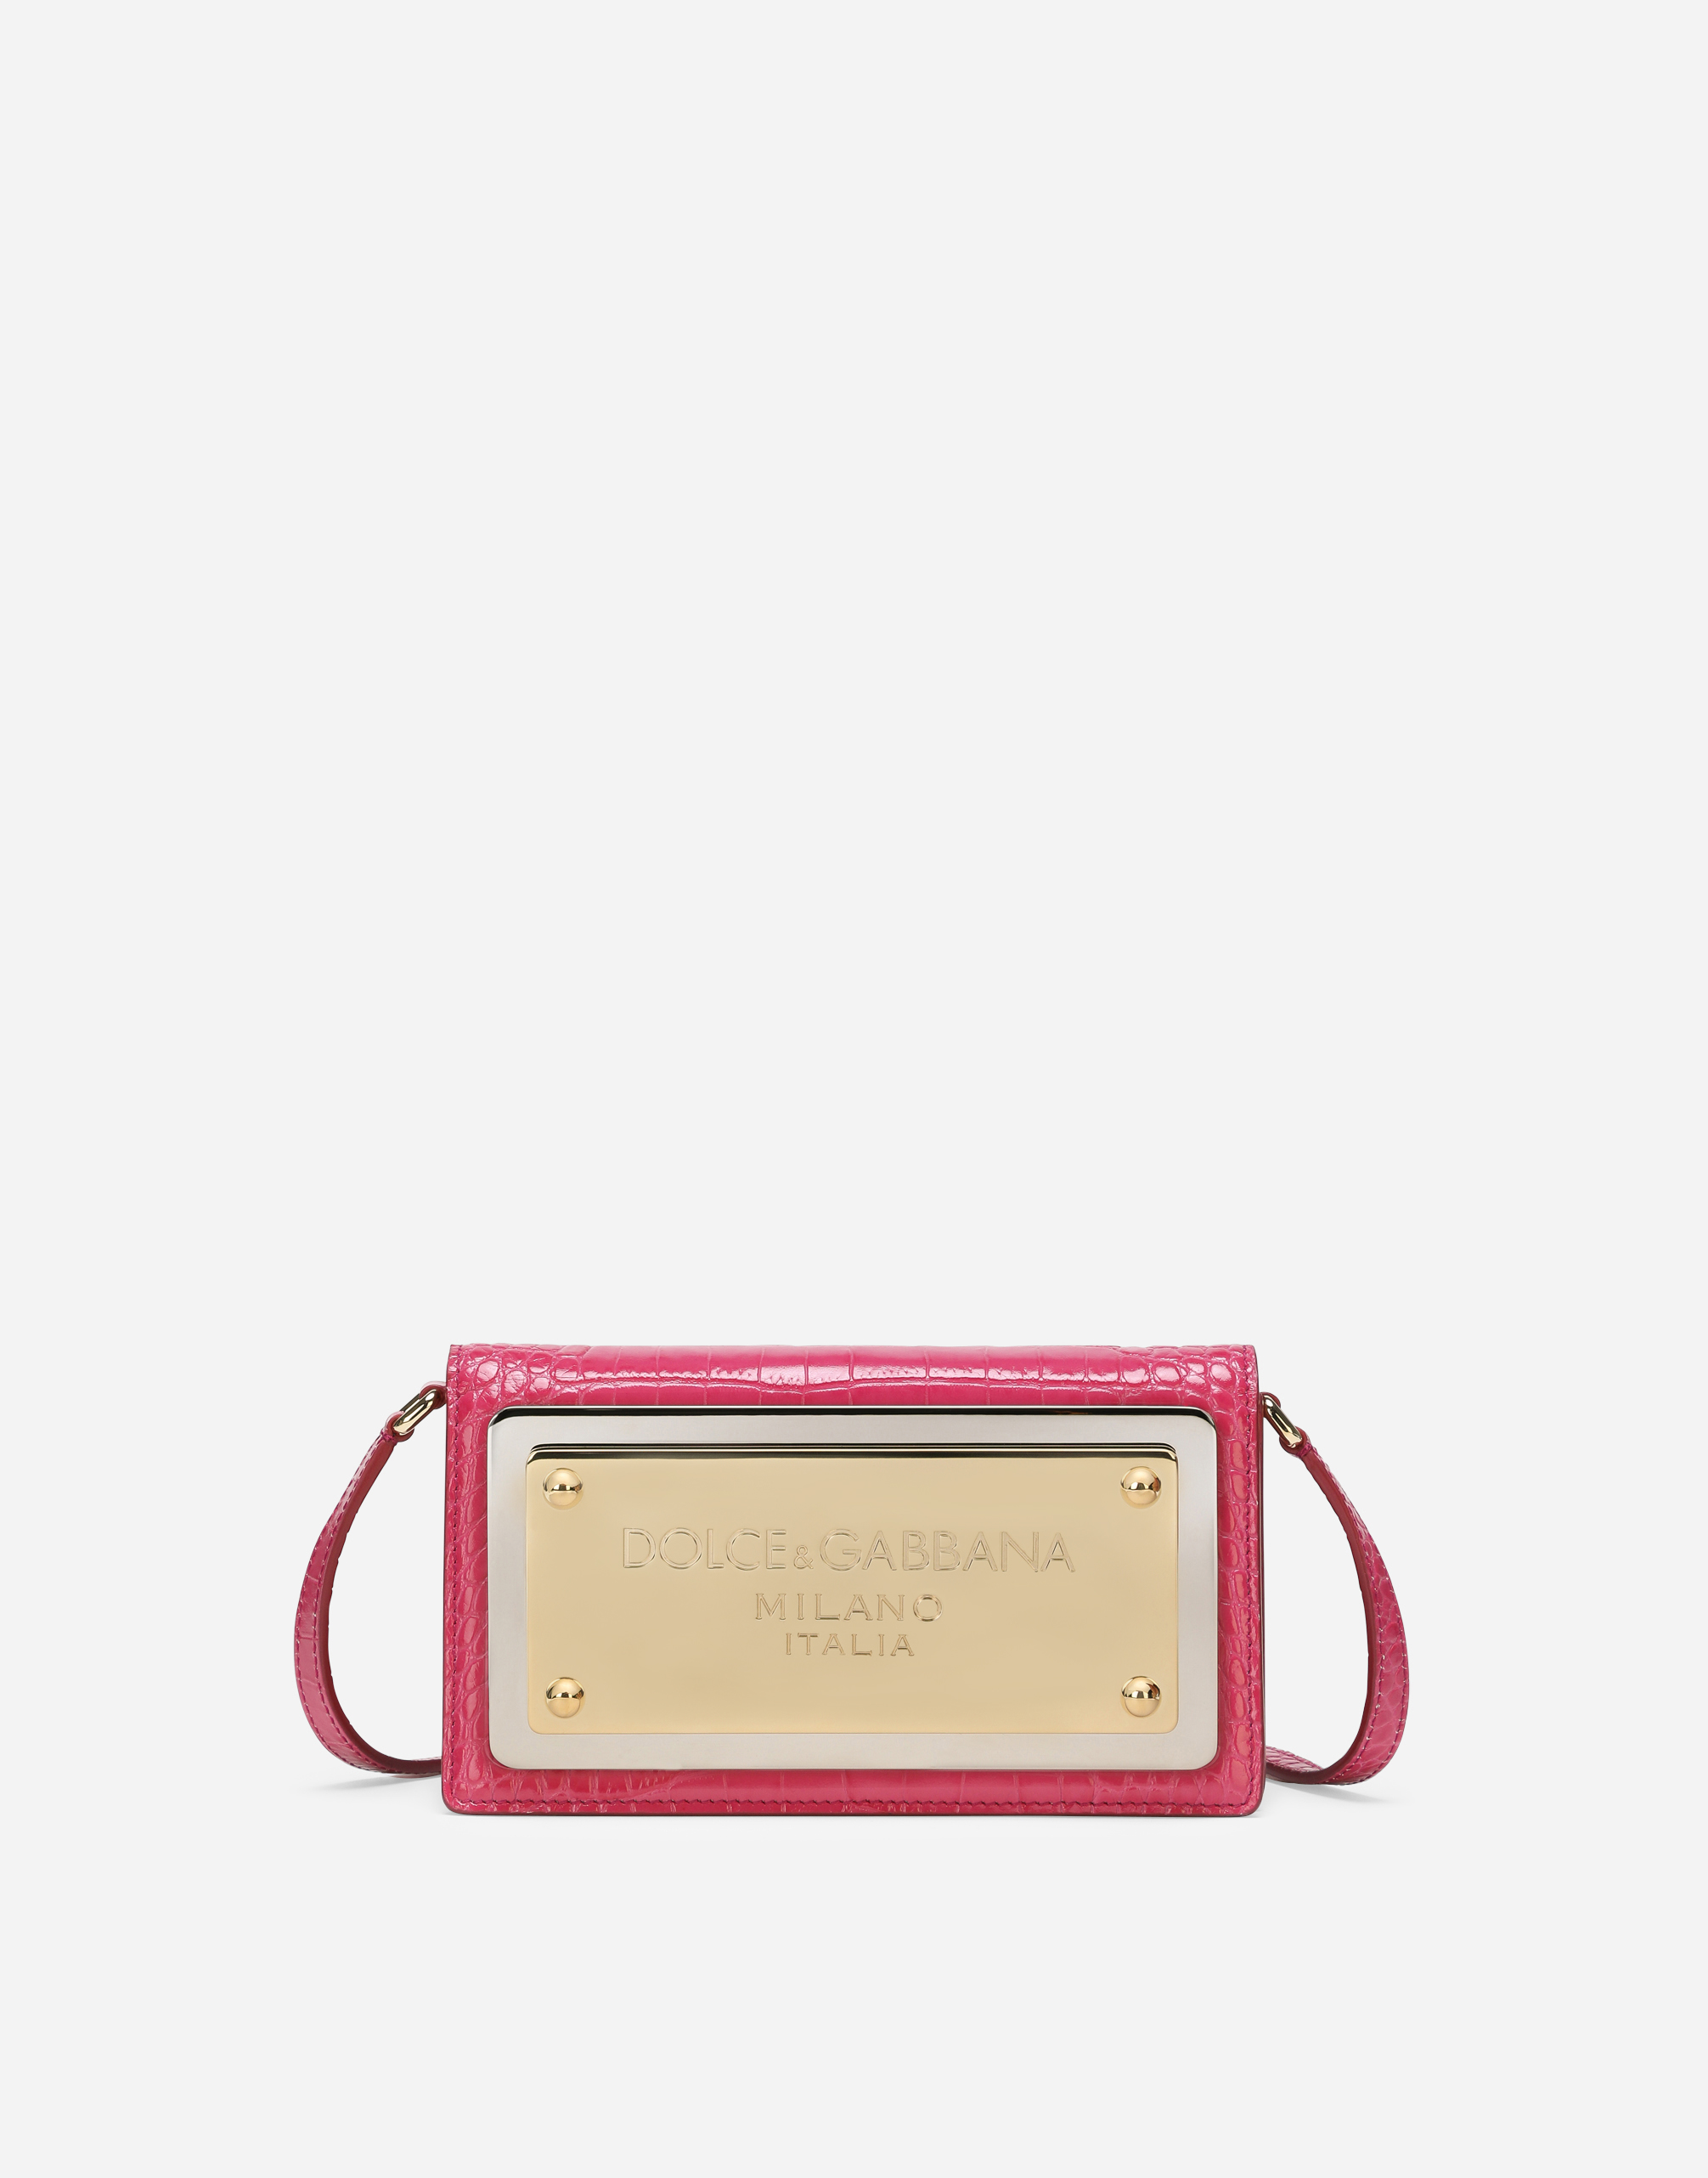 Phone bag with branded maxi-plate in Fuchsia